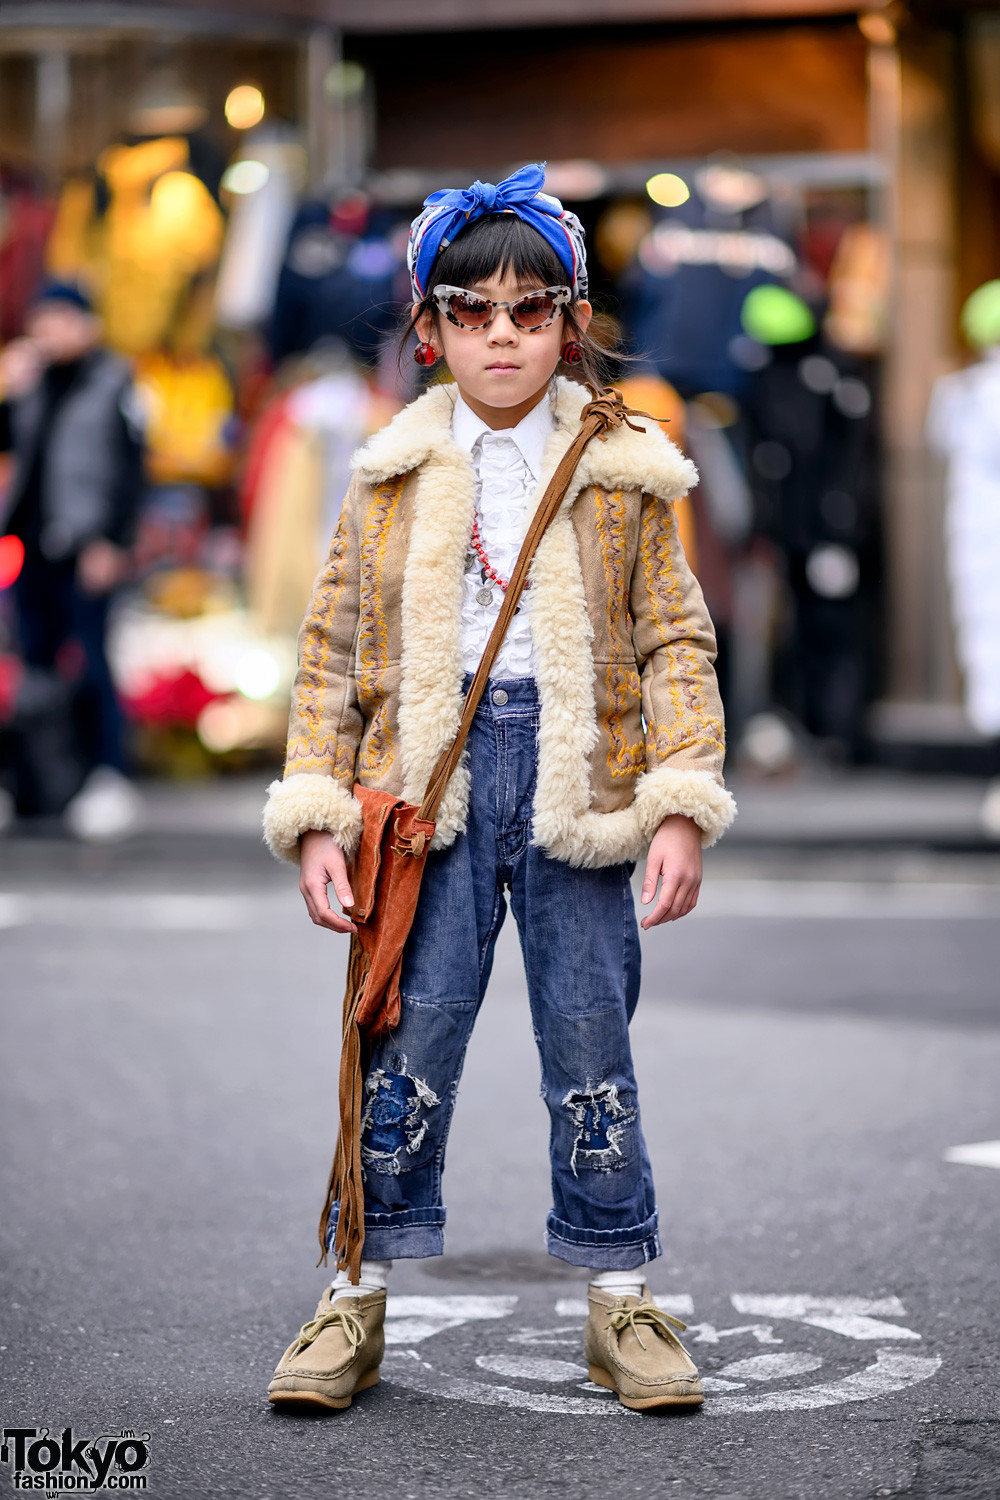 Kids Fashion Com
 6 Year Old Harajuku Girl in 1950s and 1970s Vintage Kids